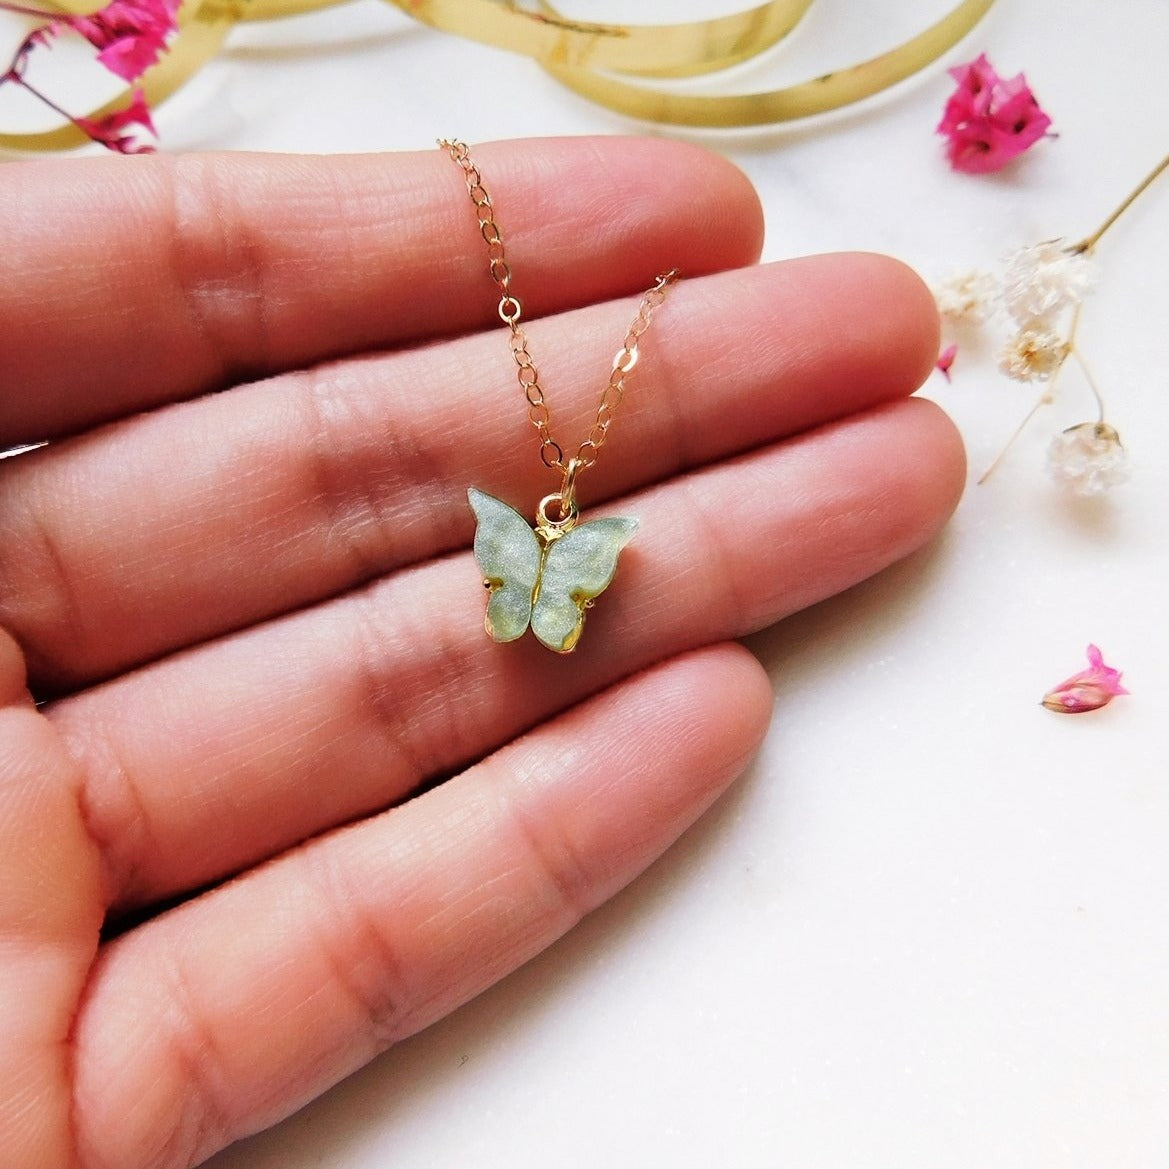 Buy BellaStella Korean Style Gold Plated Chain Green Butterfly Pendant  Necklace for Women and Girls Pack Of 1 Pcs at Amazon.in